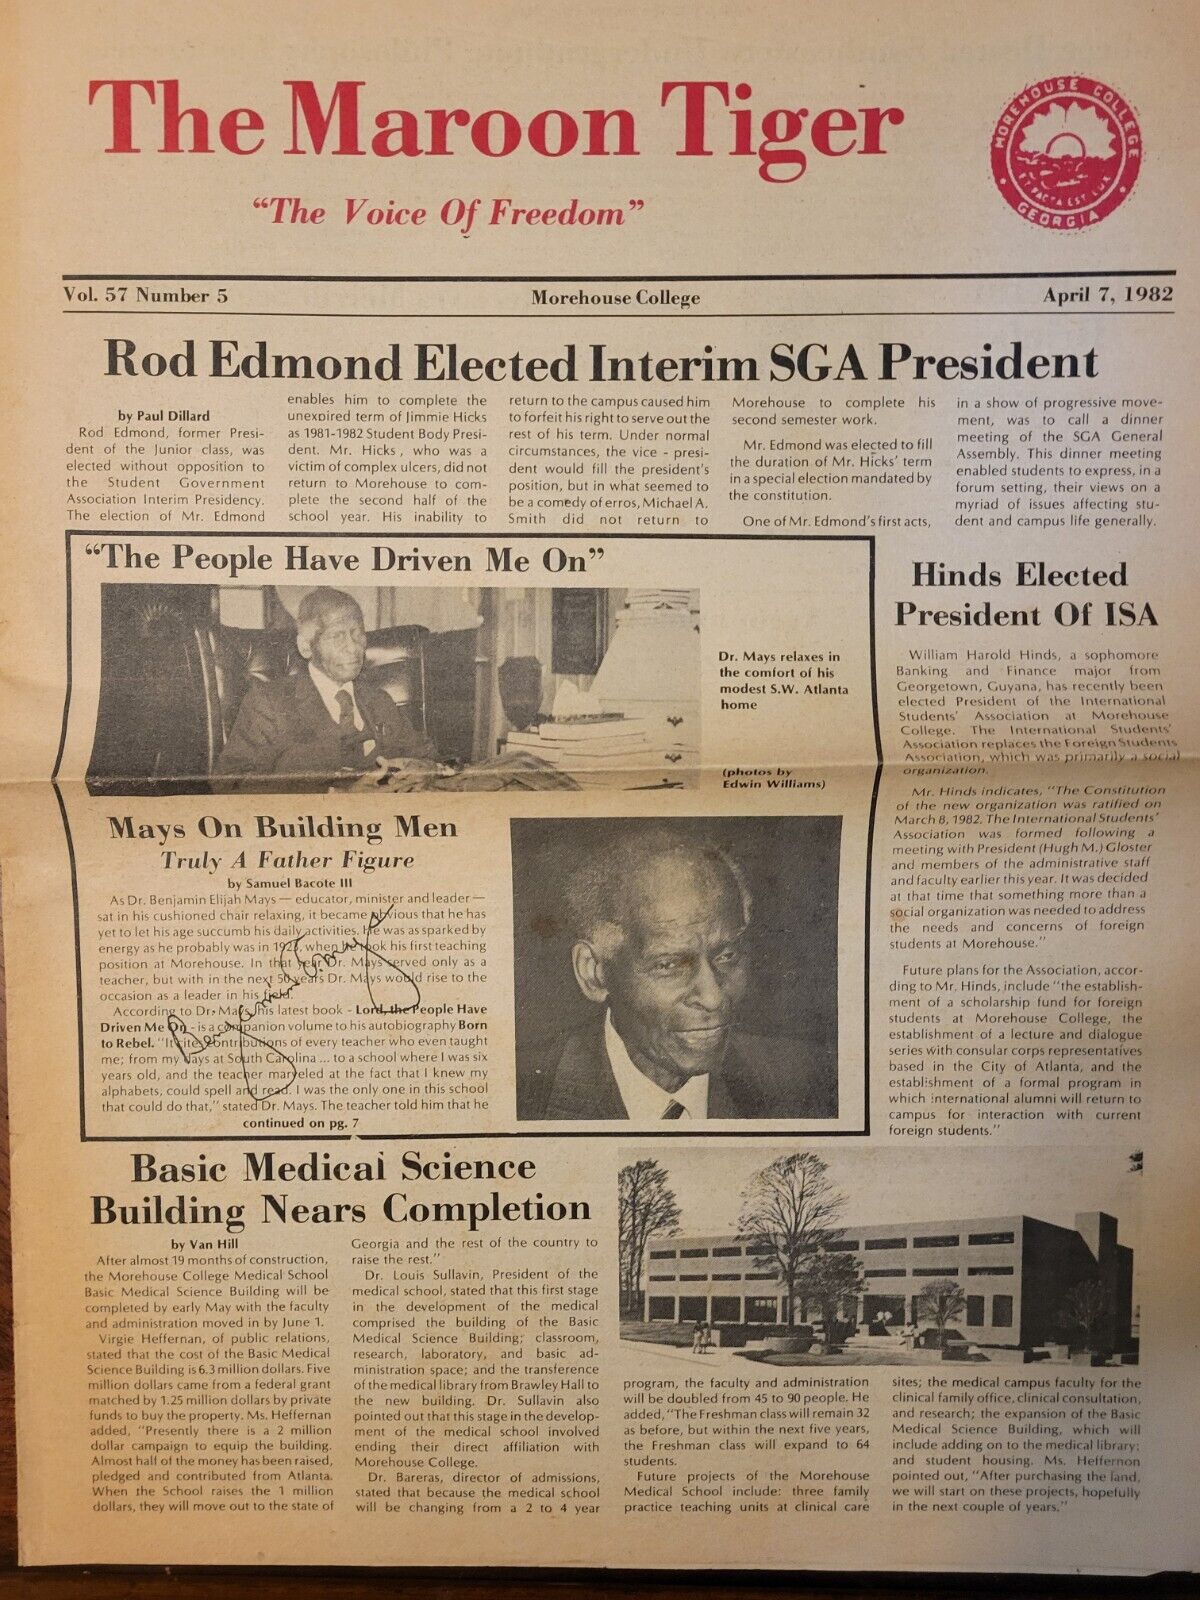 Supre Rare Morehouse College Newspaper The Maroon Tiger Signed By President...